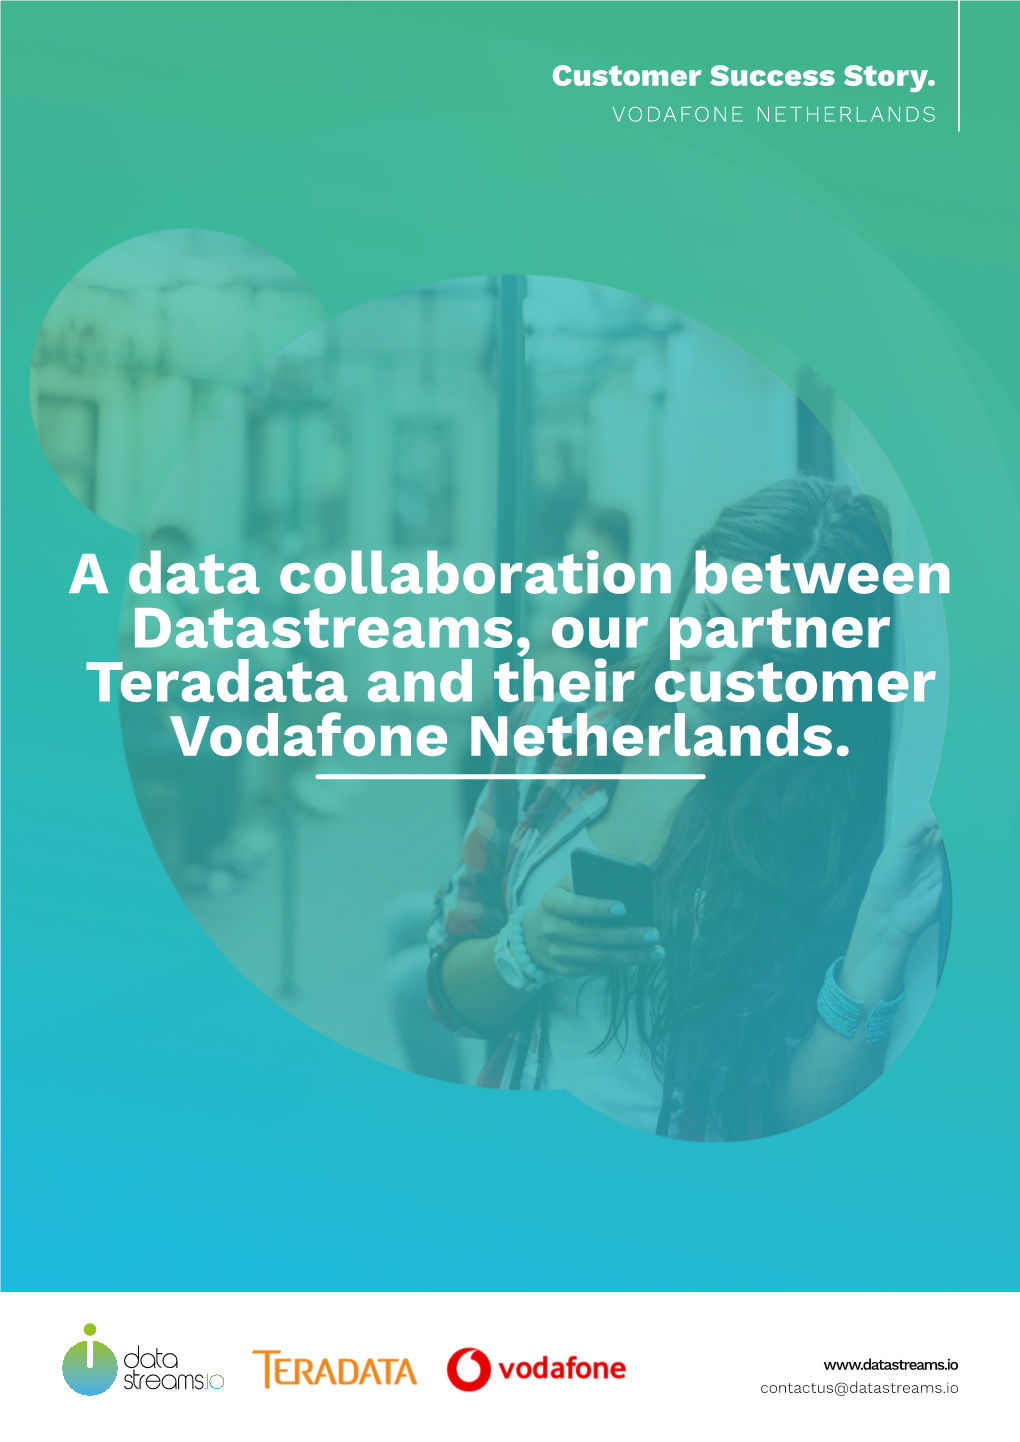 A Data Collaboration Between Datastreams, Our Partner Teradata and Their Customer Vodafone Netherlands